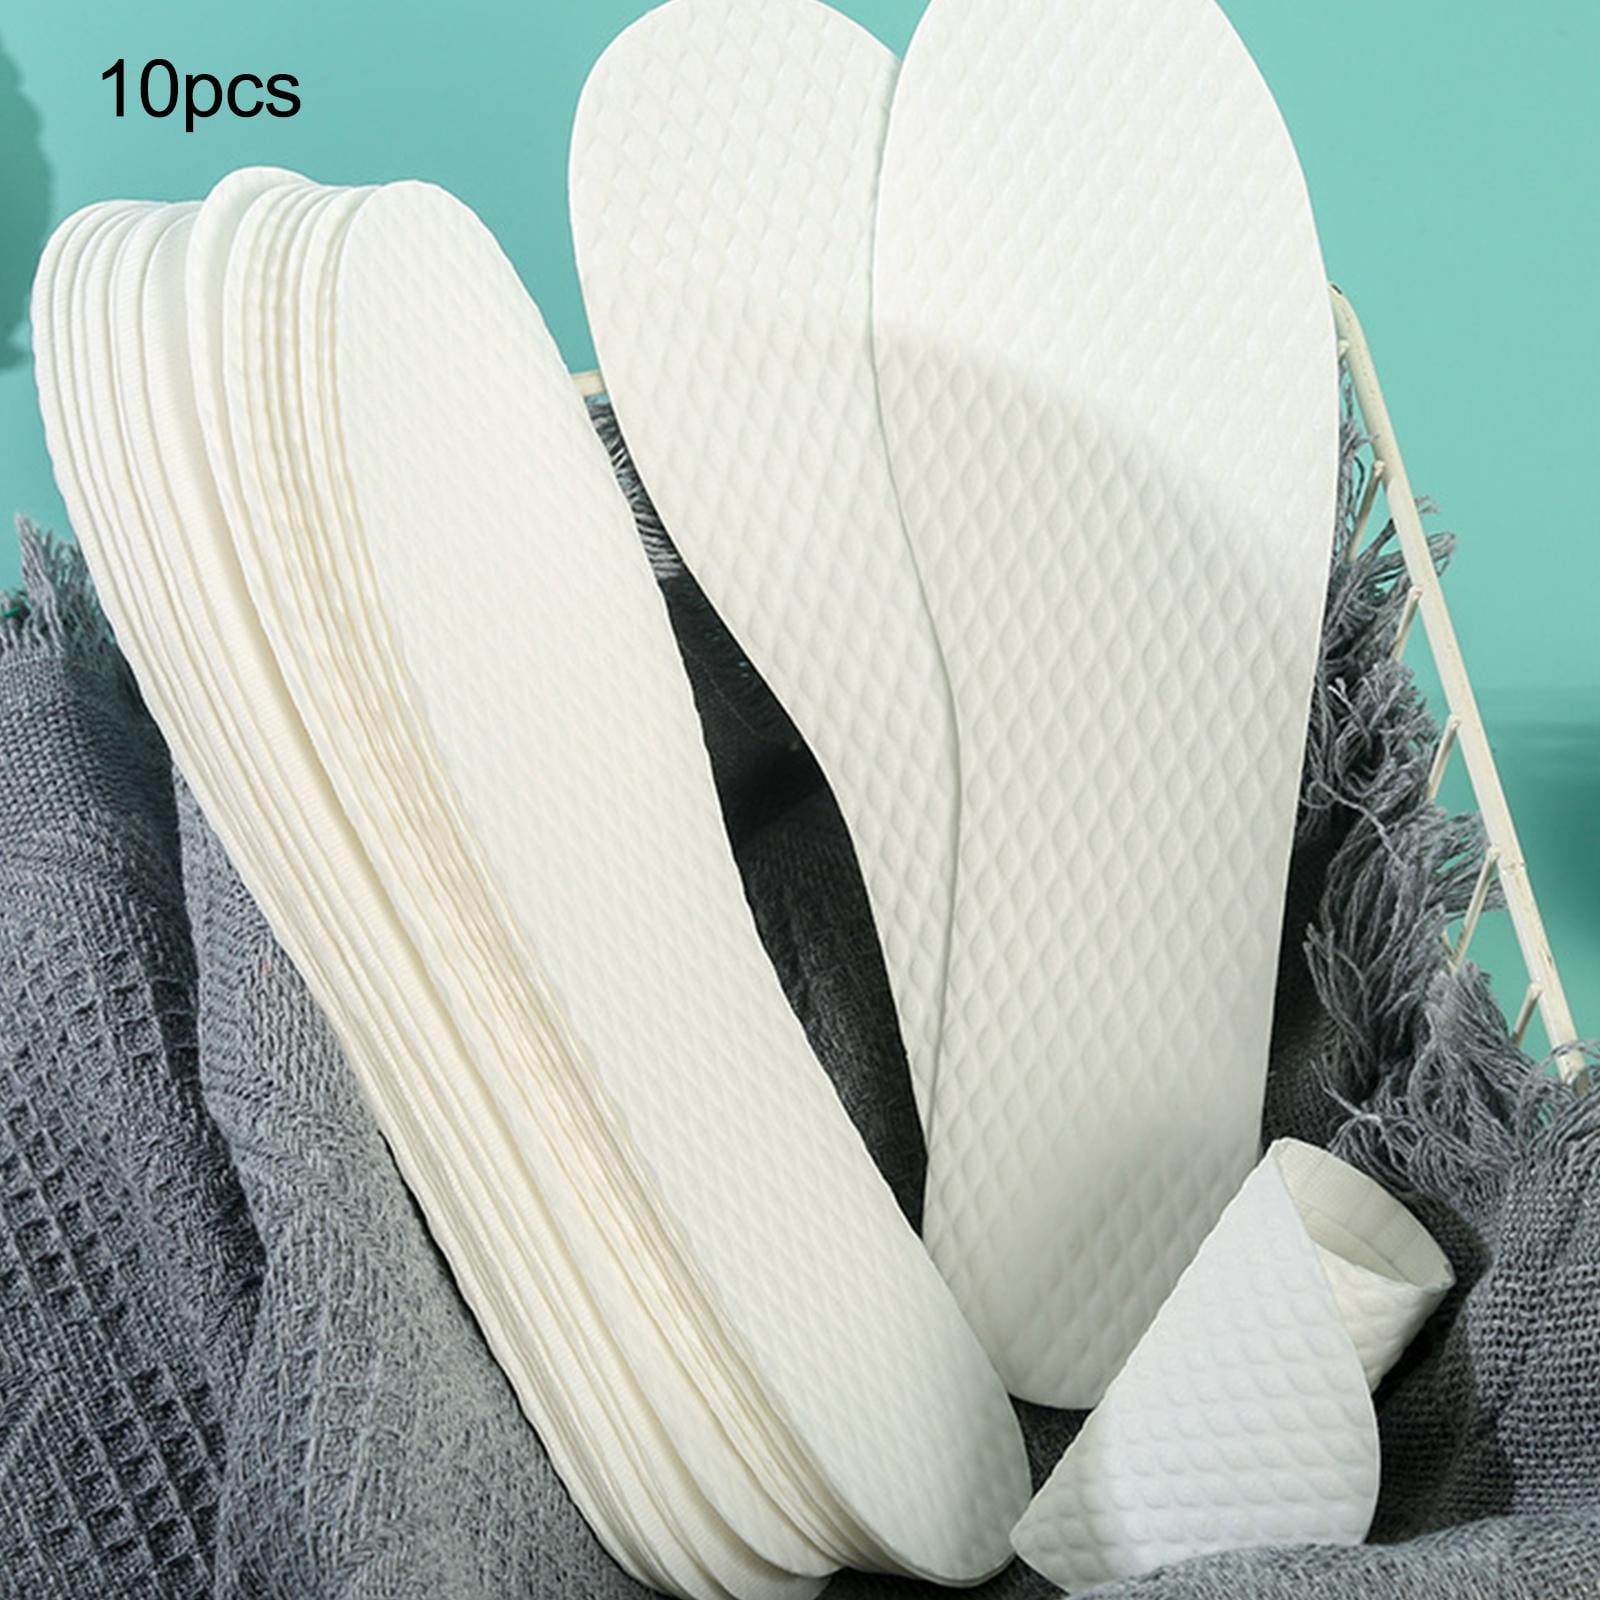 Breathable Shoe Insoles,disposable shoe liners for sweaty feet women ...